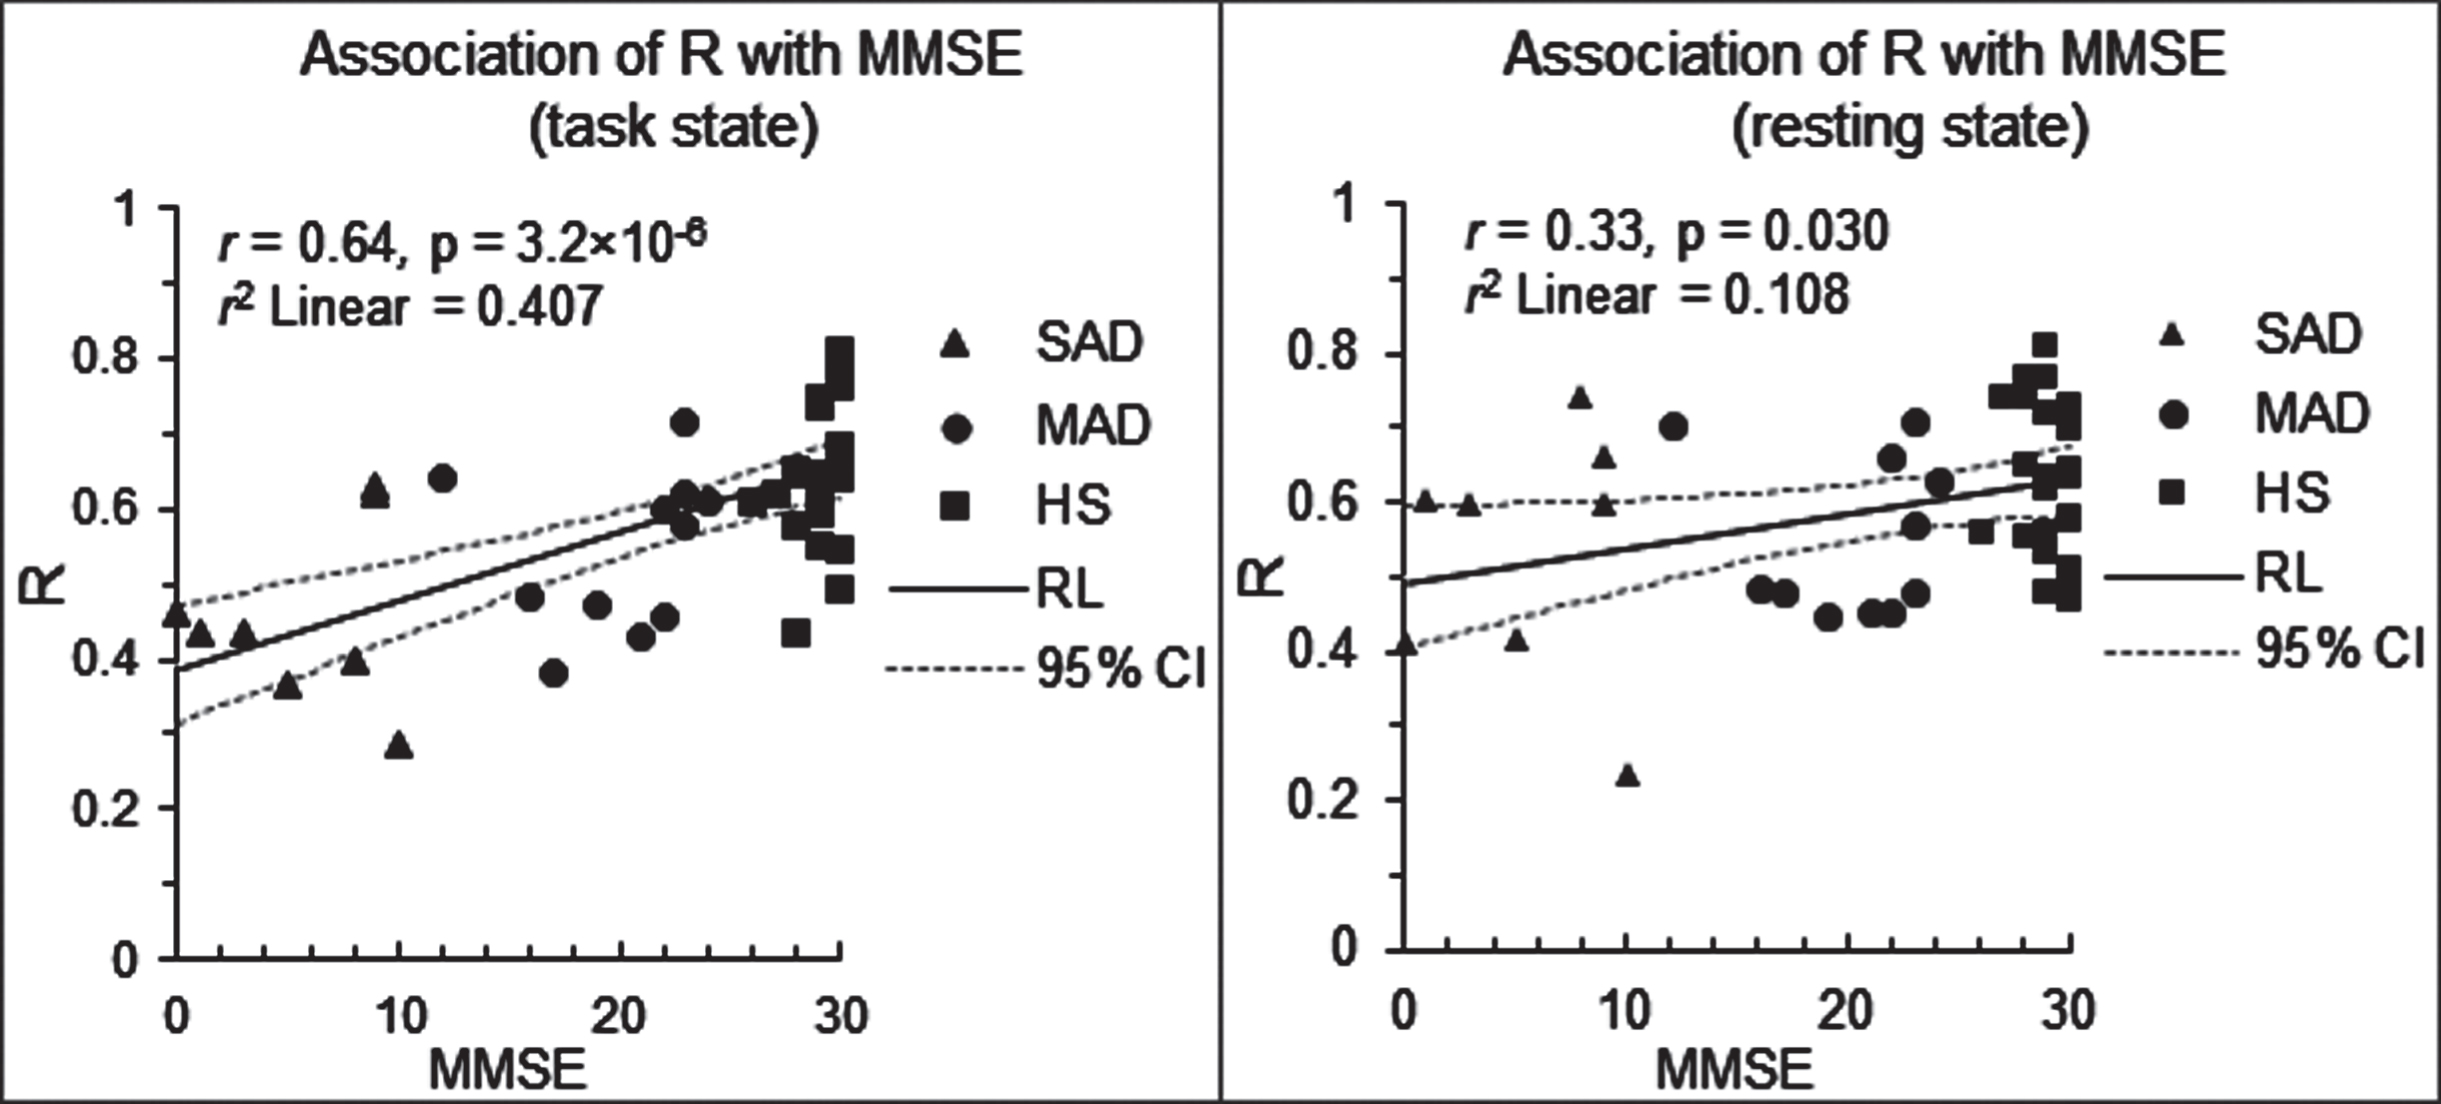 Association of the disrupted network with the disease severity. Left: scatter plot of R versus MMSE for the face-evoked visual-processing network. Right: scatter plot of R versus MMSE for the resting-state visual FC network. MMSE, Mini-Mental State Examination; and r, the correlation of R with MMSE over all subjects (N = 44); RL, regression line; and CI, confidence interval.